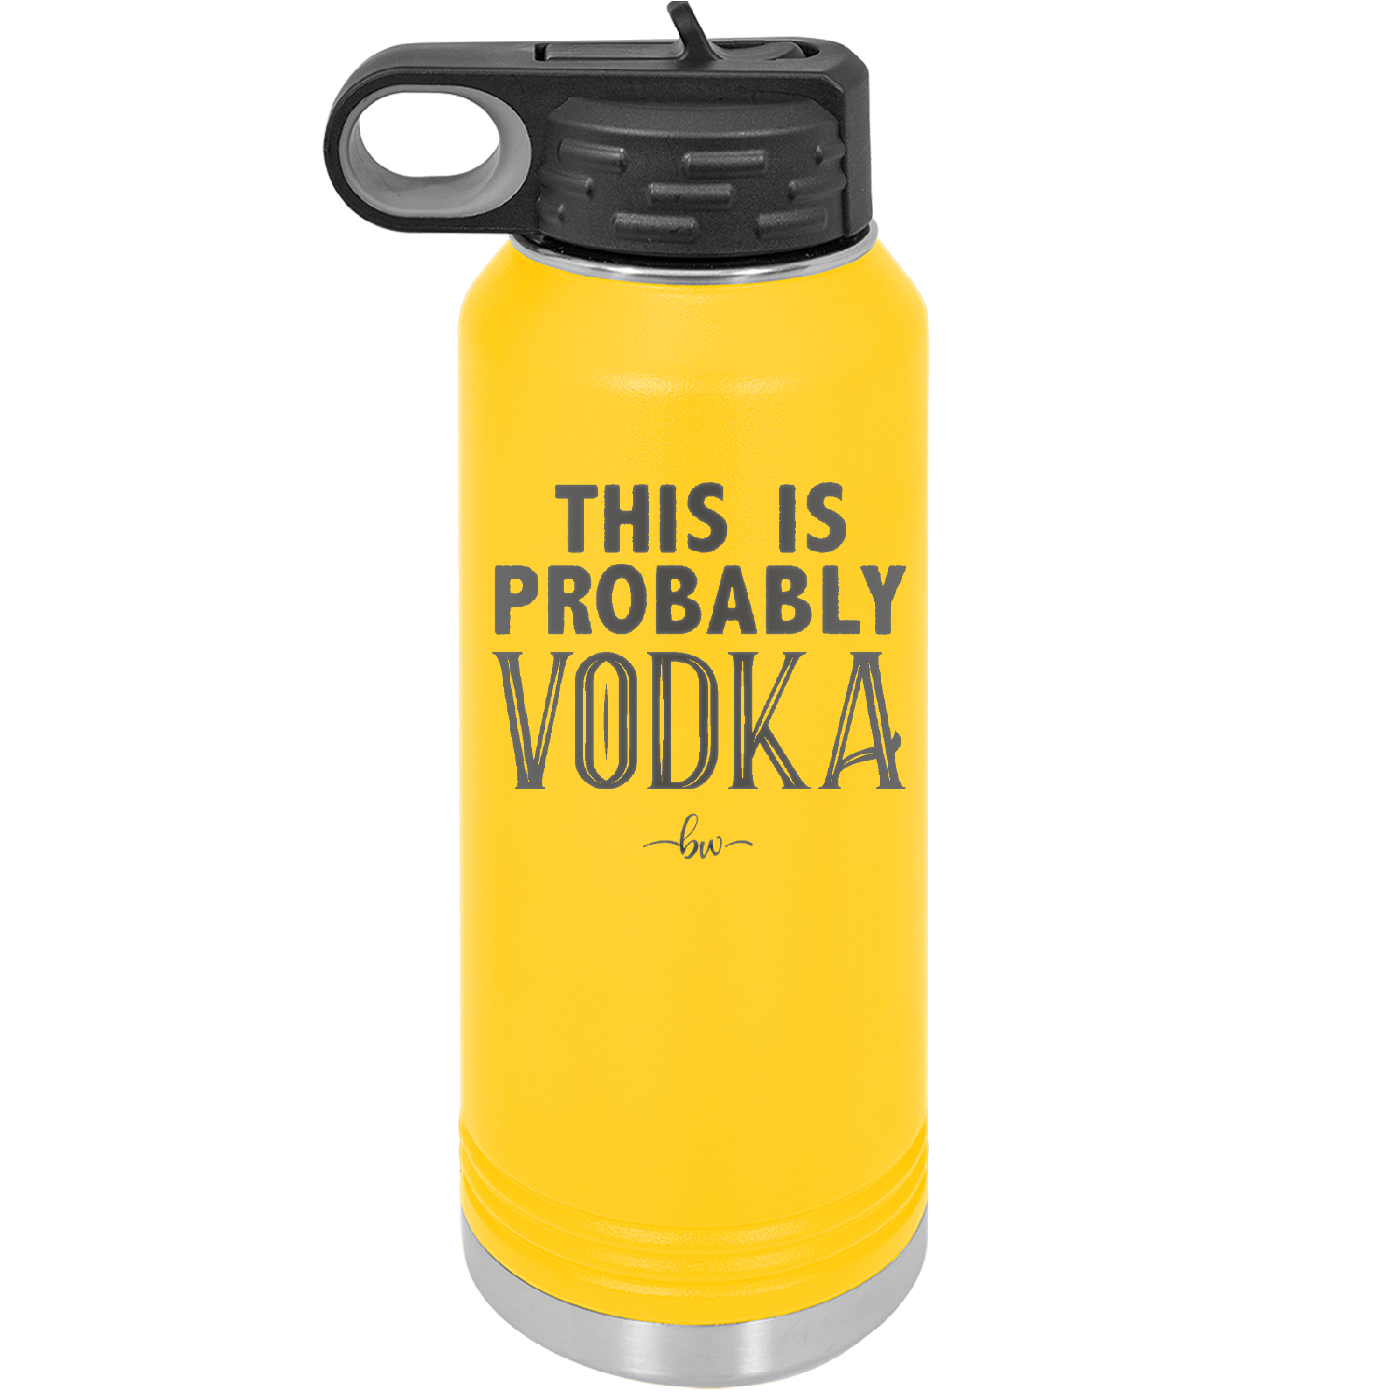 This is Probably Vodka - Laser Engraved Stainless Steel Drinkware - 1004 -